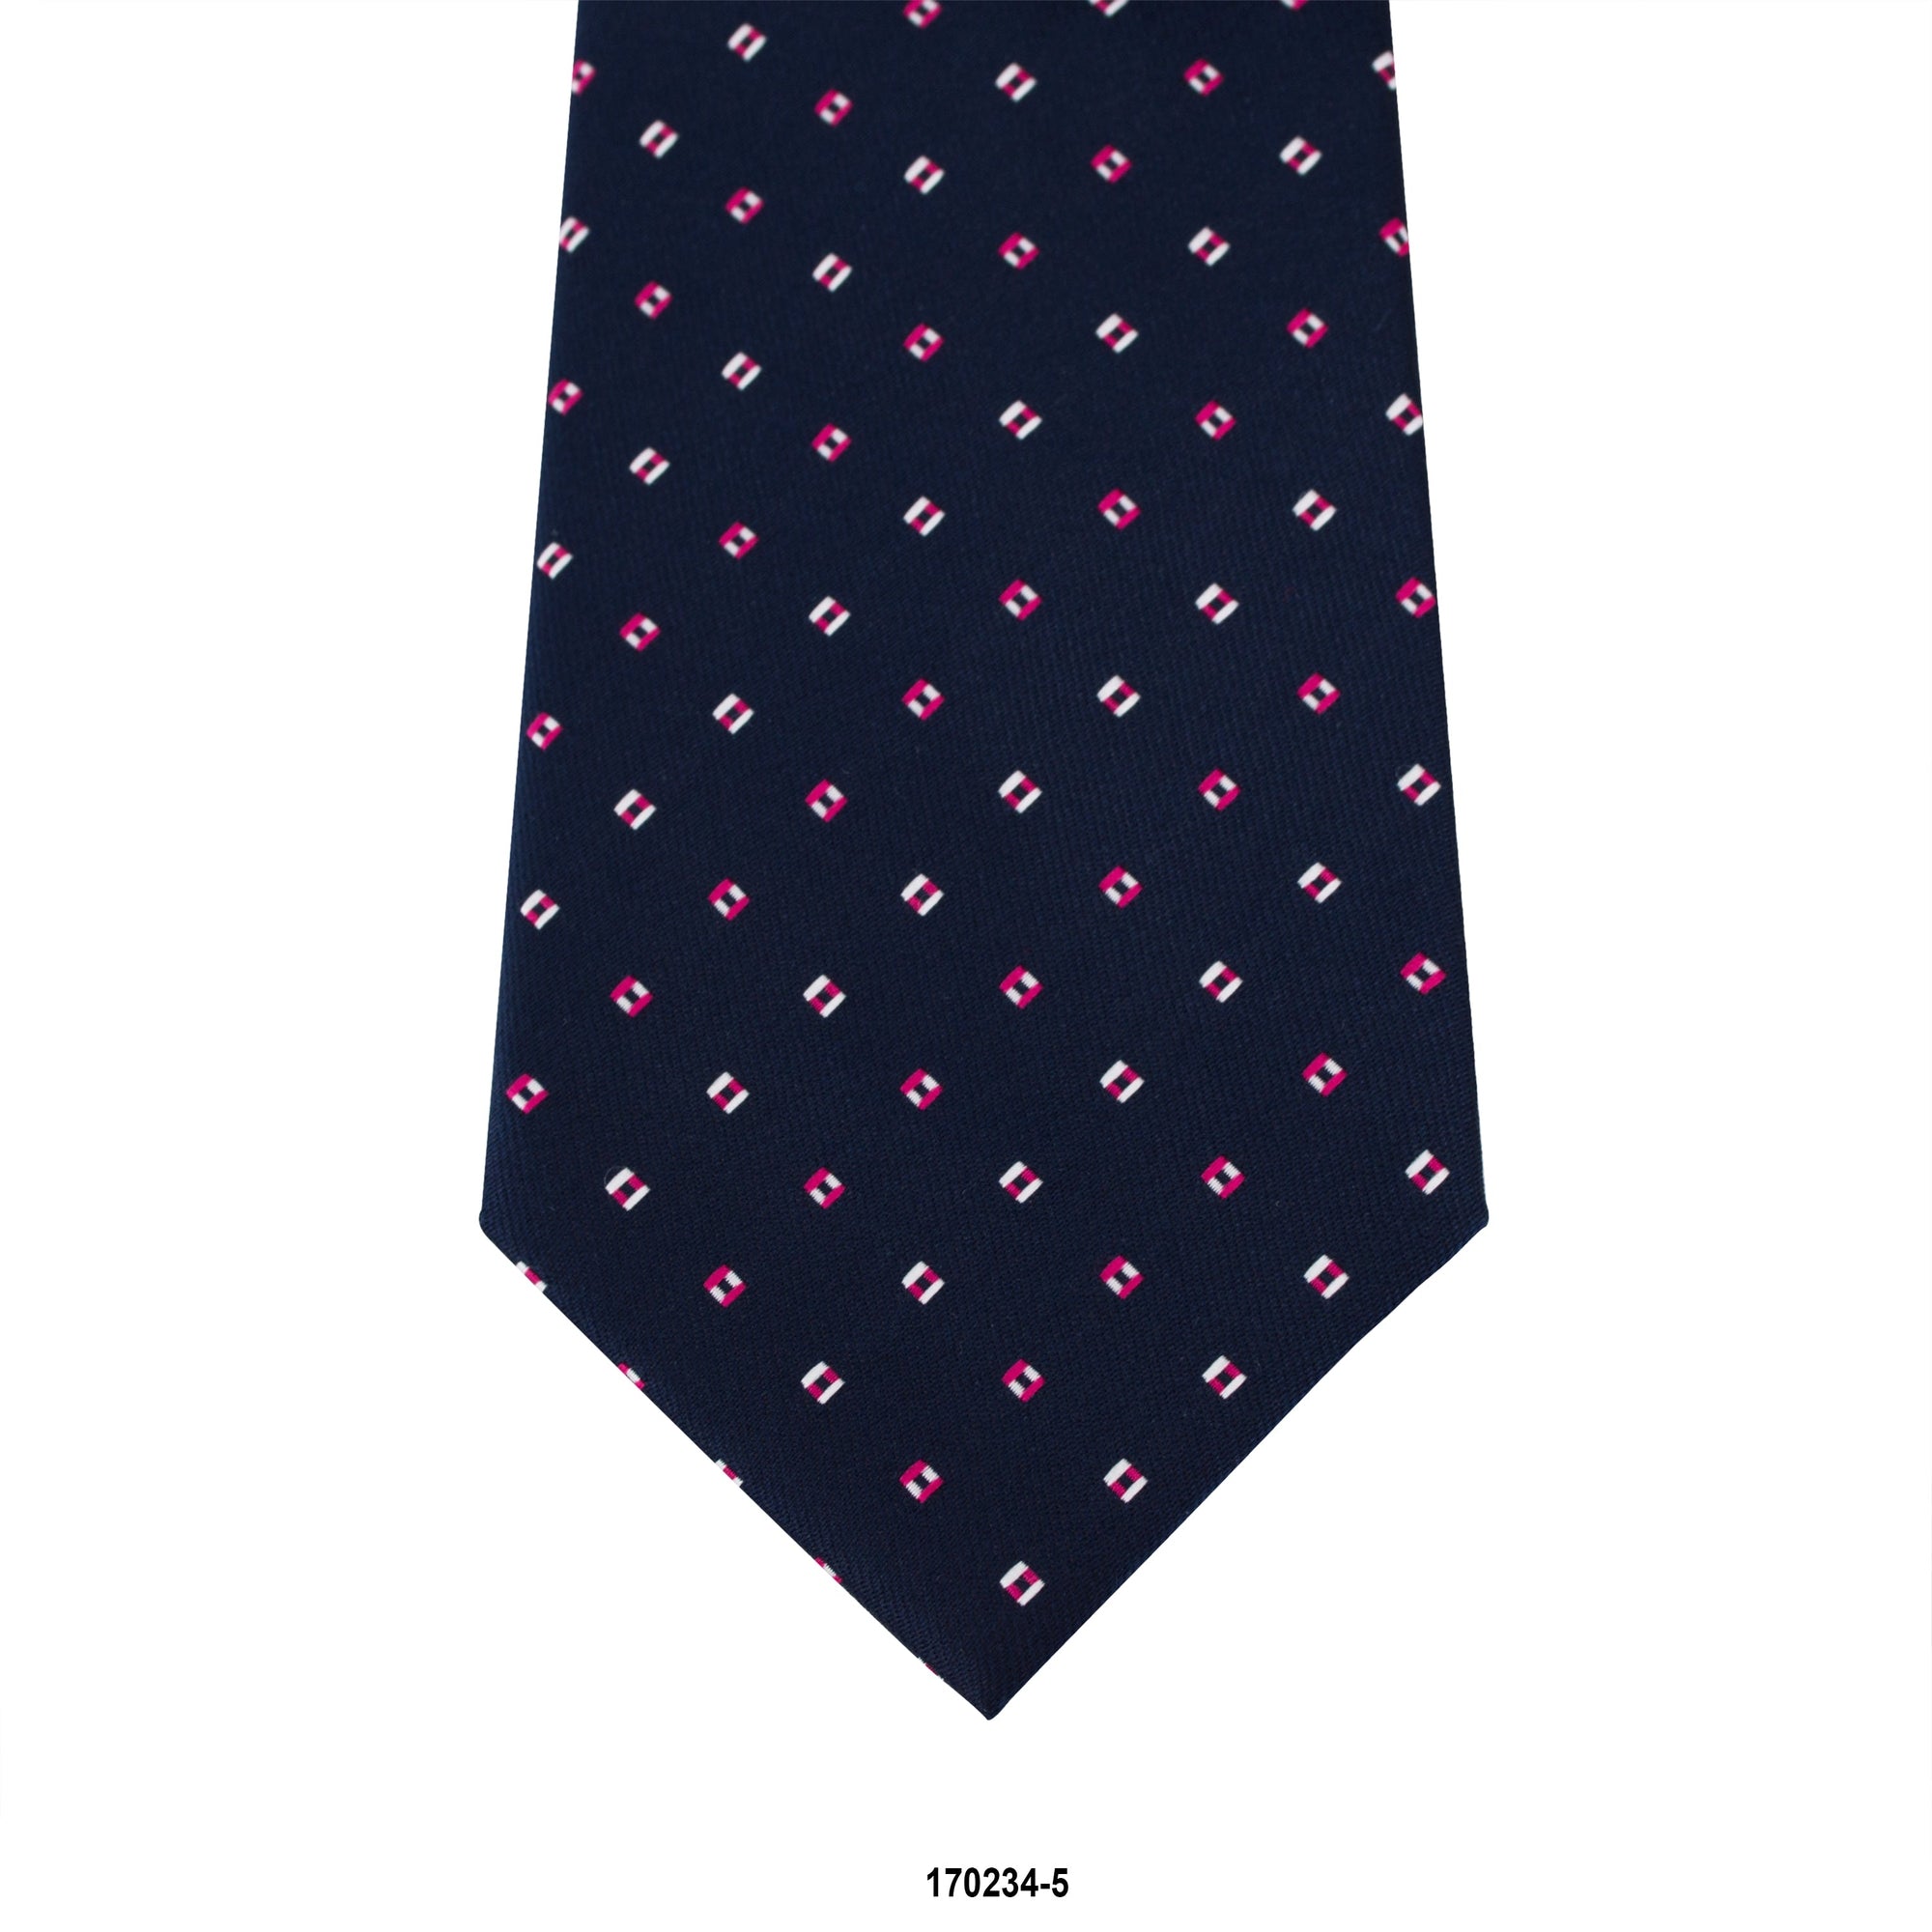 MarZthomson 8cm Navy Woven Tie with White and Pink Square Details J-Cufflinks.com.sg | Neckties.com.sg